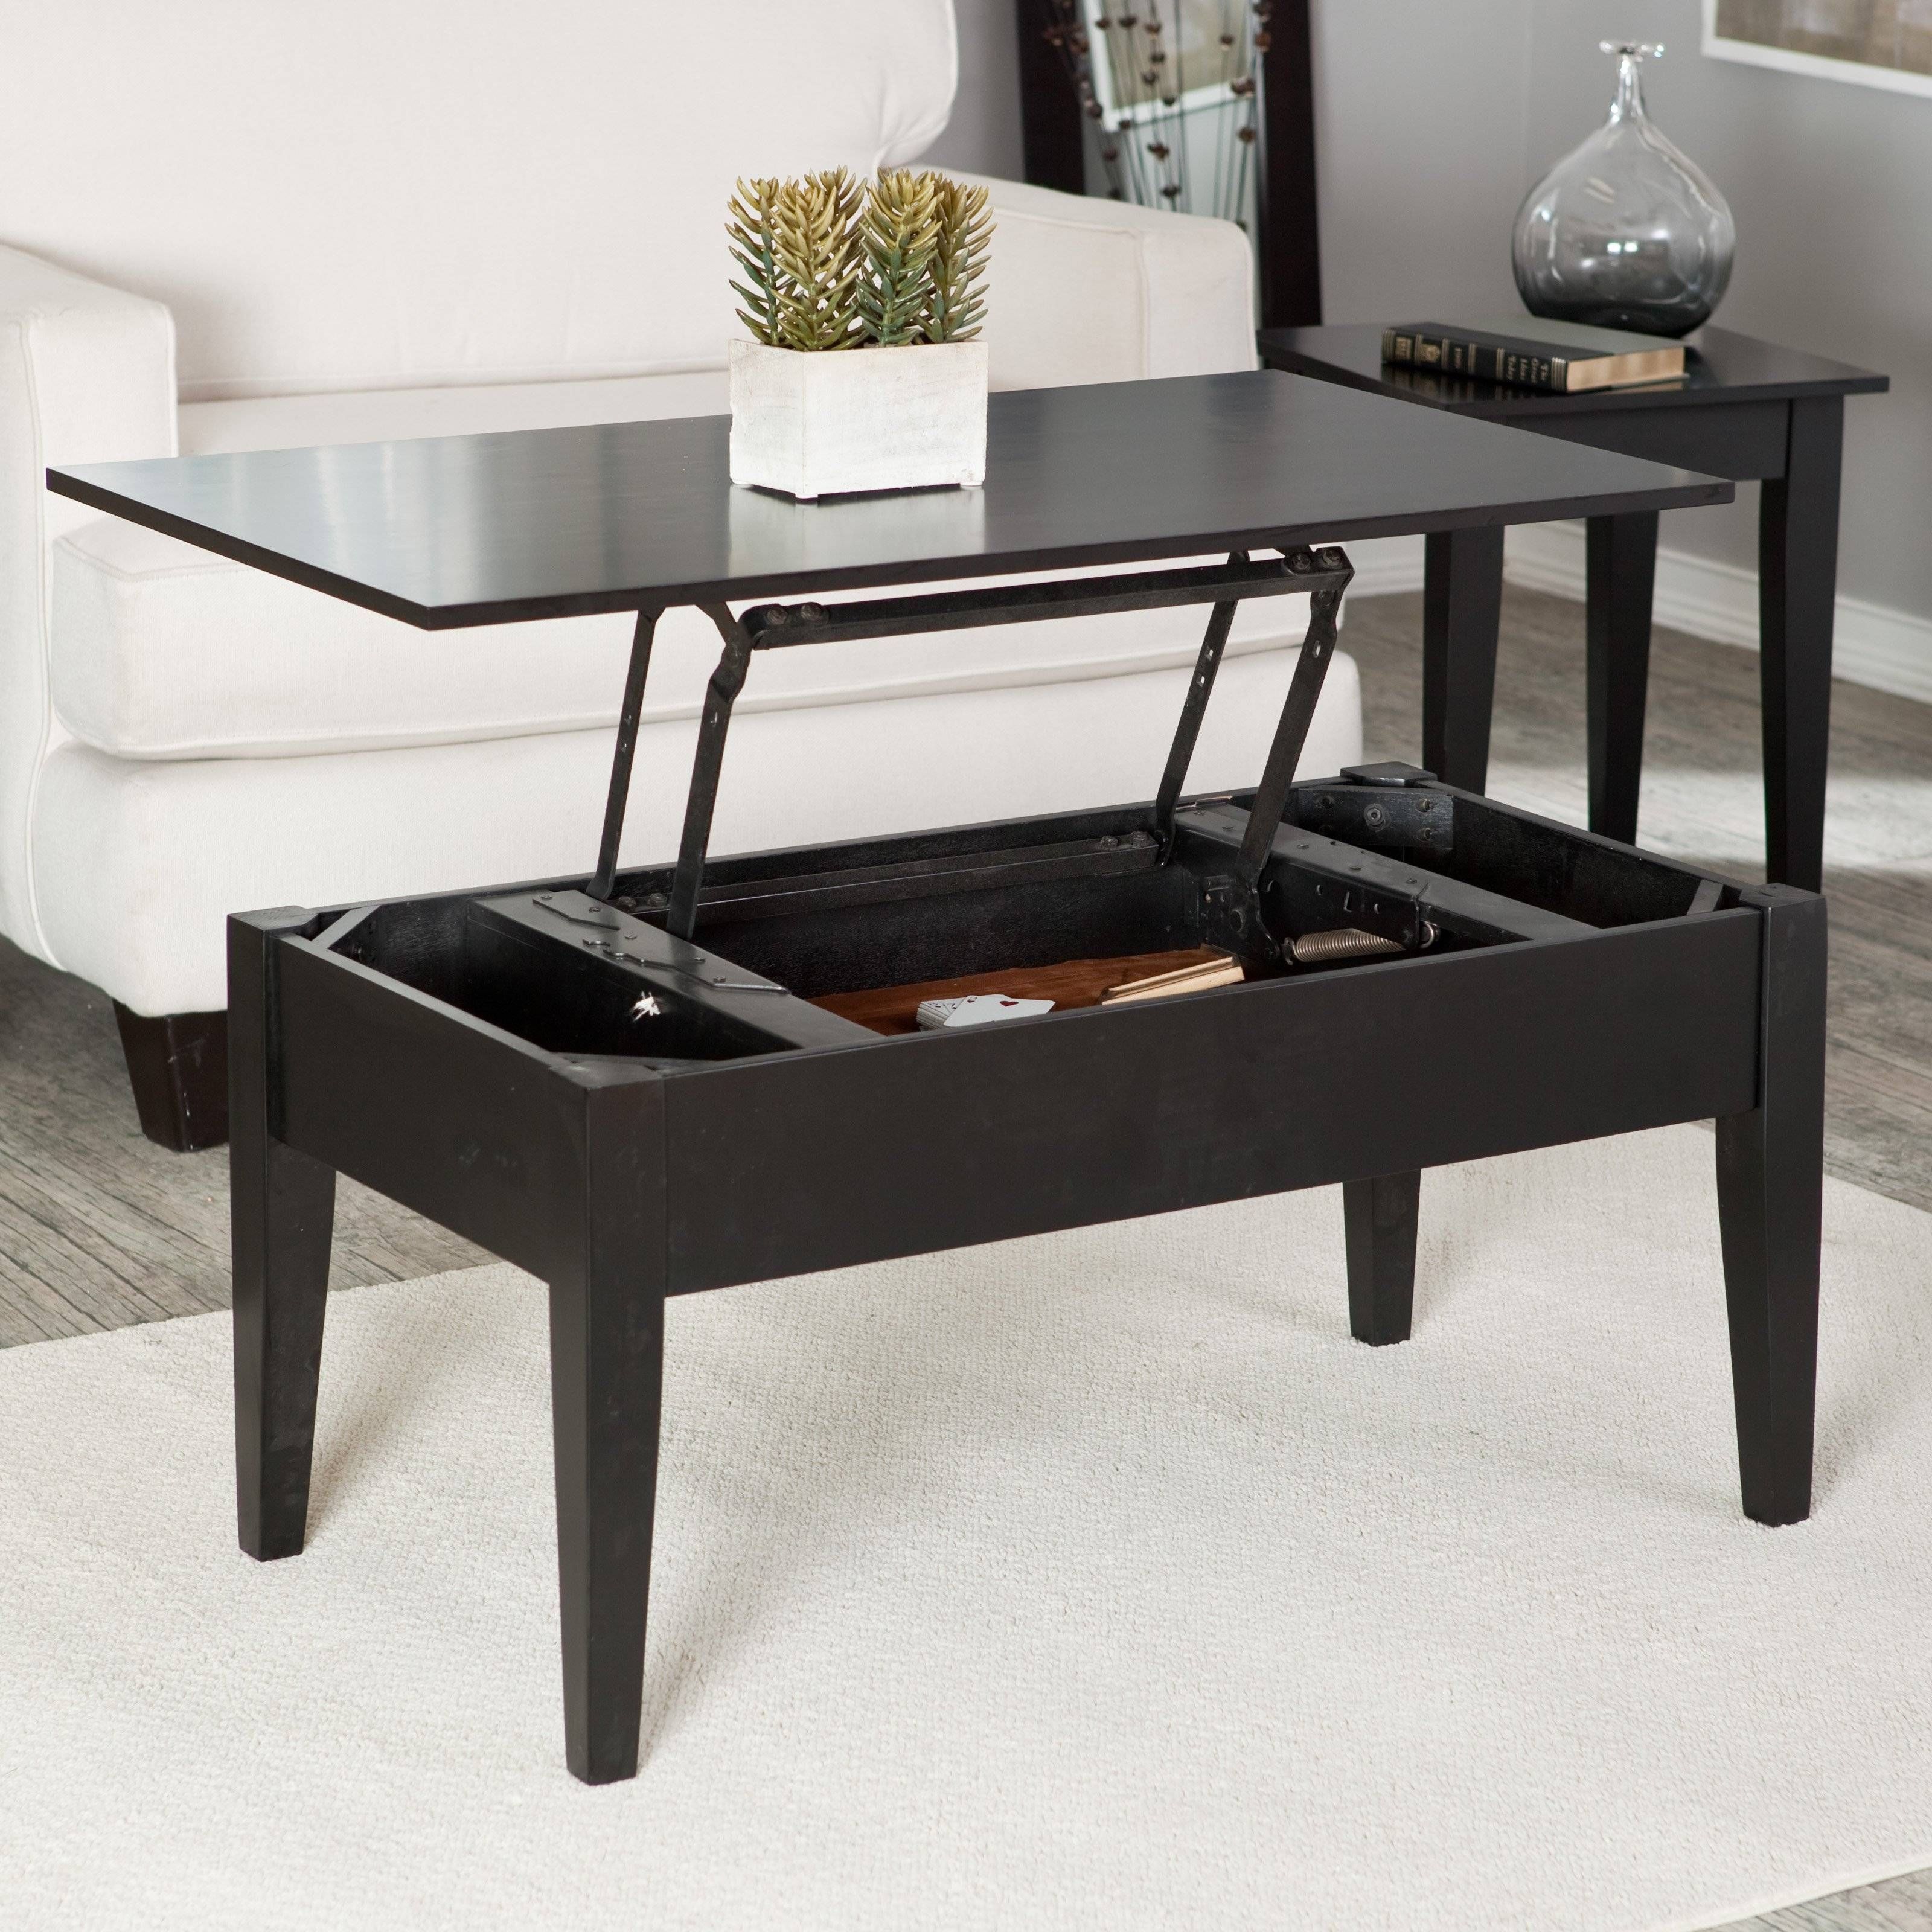 Turner Lift Top Coffee Table – Espresso | Hayneedle Throughout Lift Up Coffee Tables (View 1 of 30)